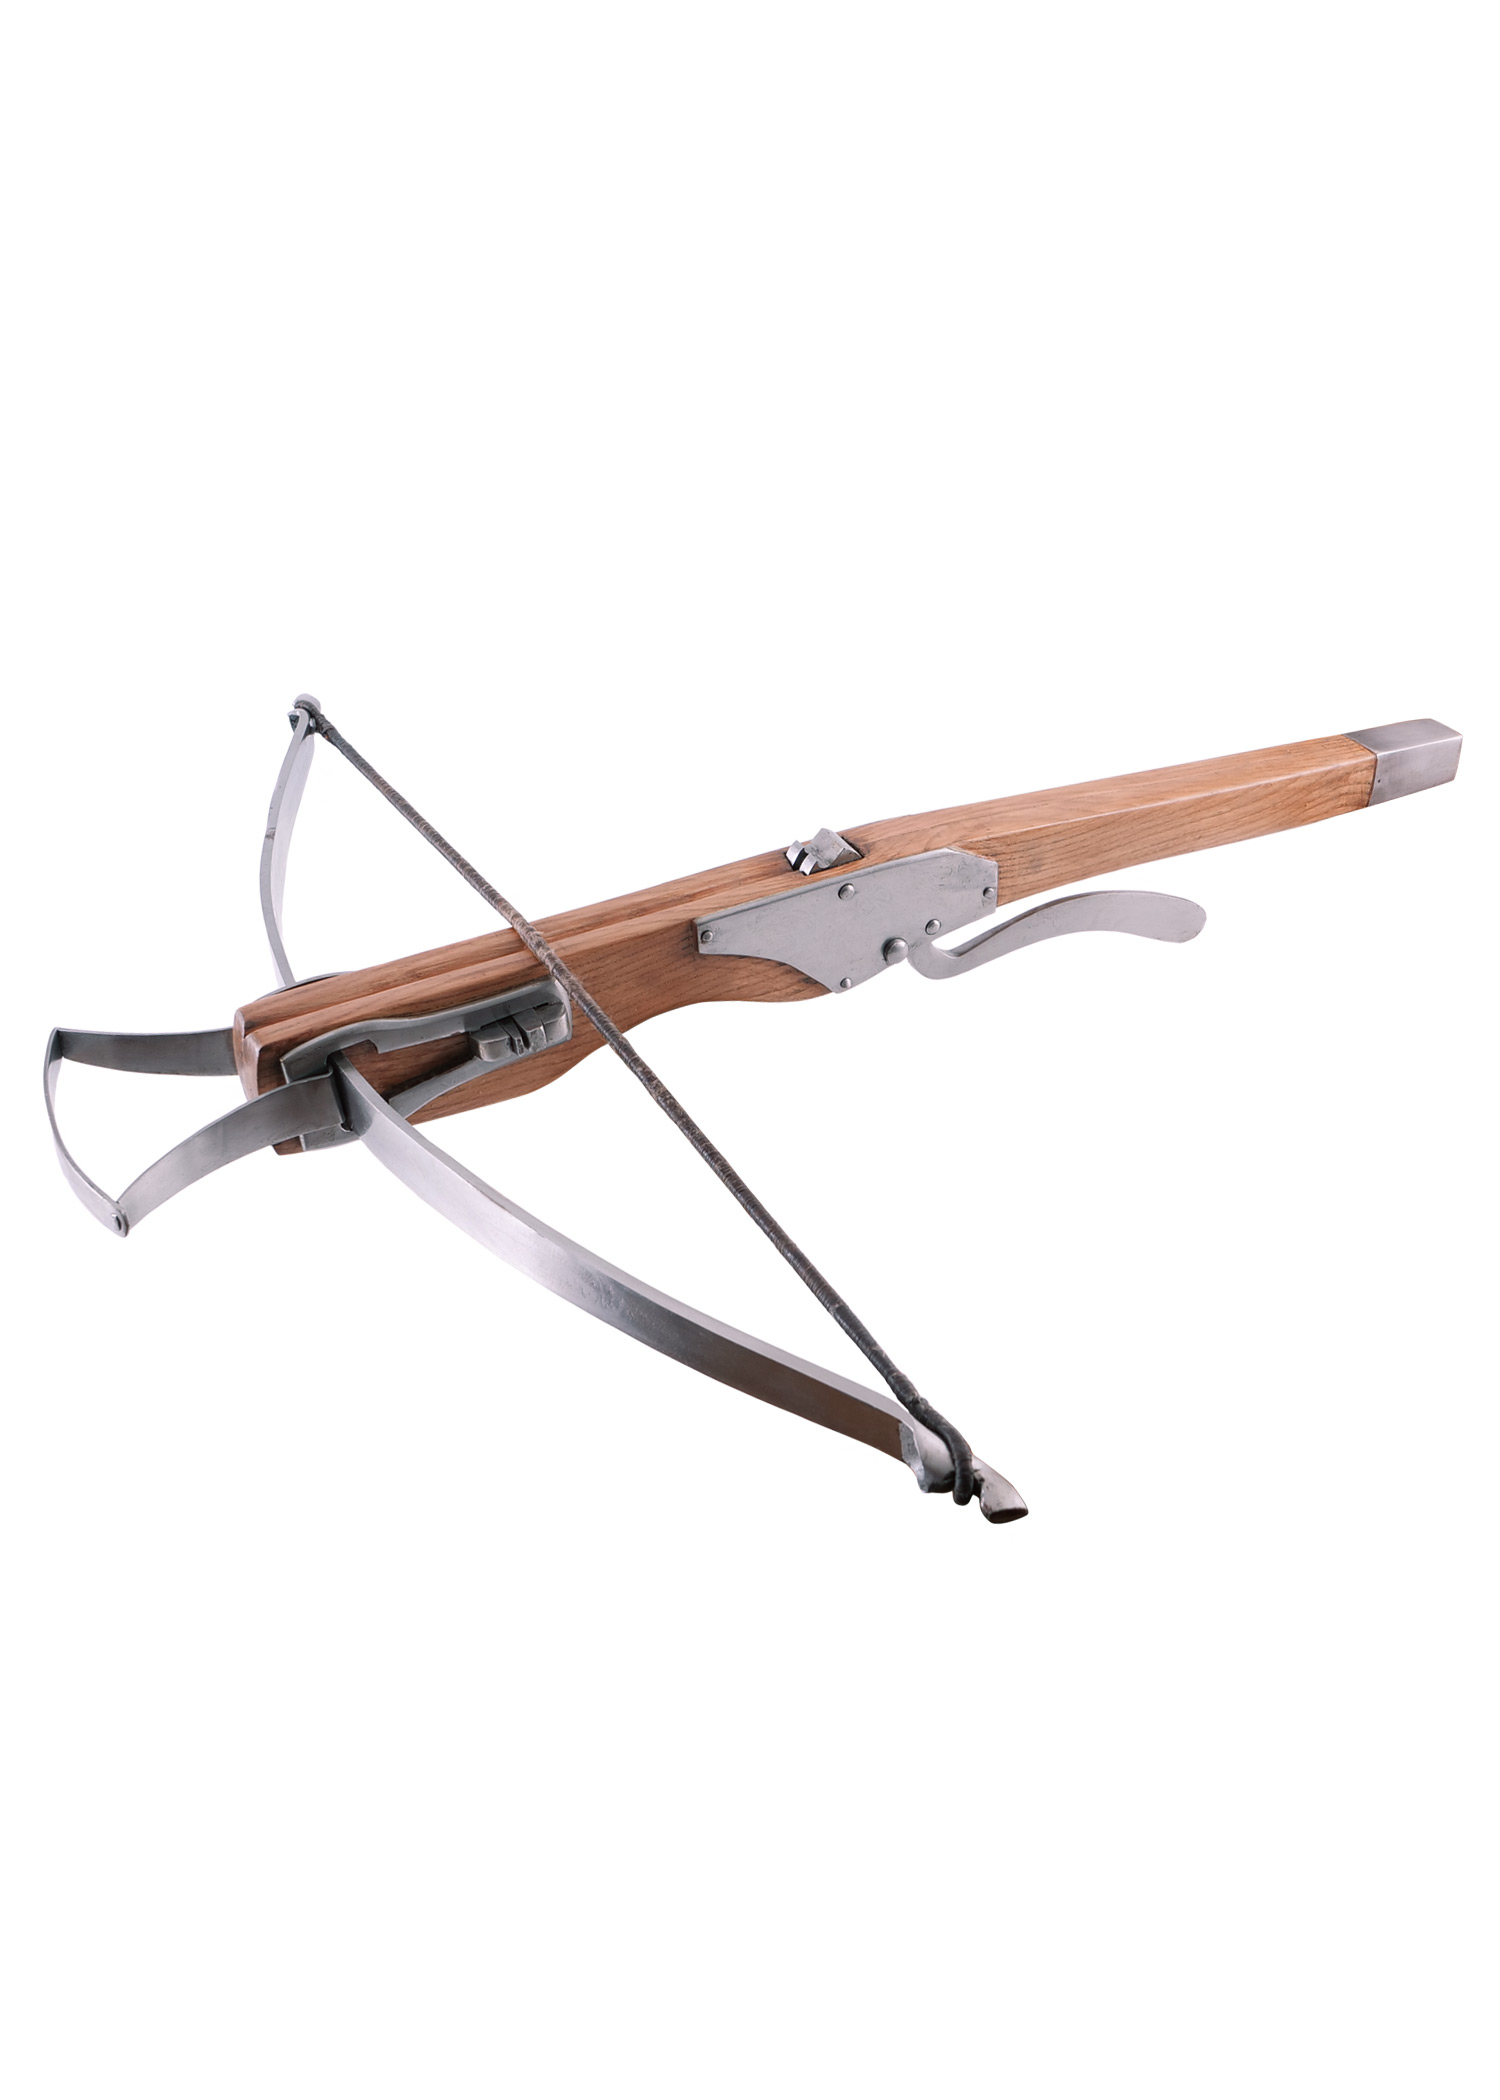 natural Children's bow "Little Archer" 30 inches english longbow for kids 